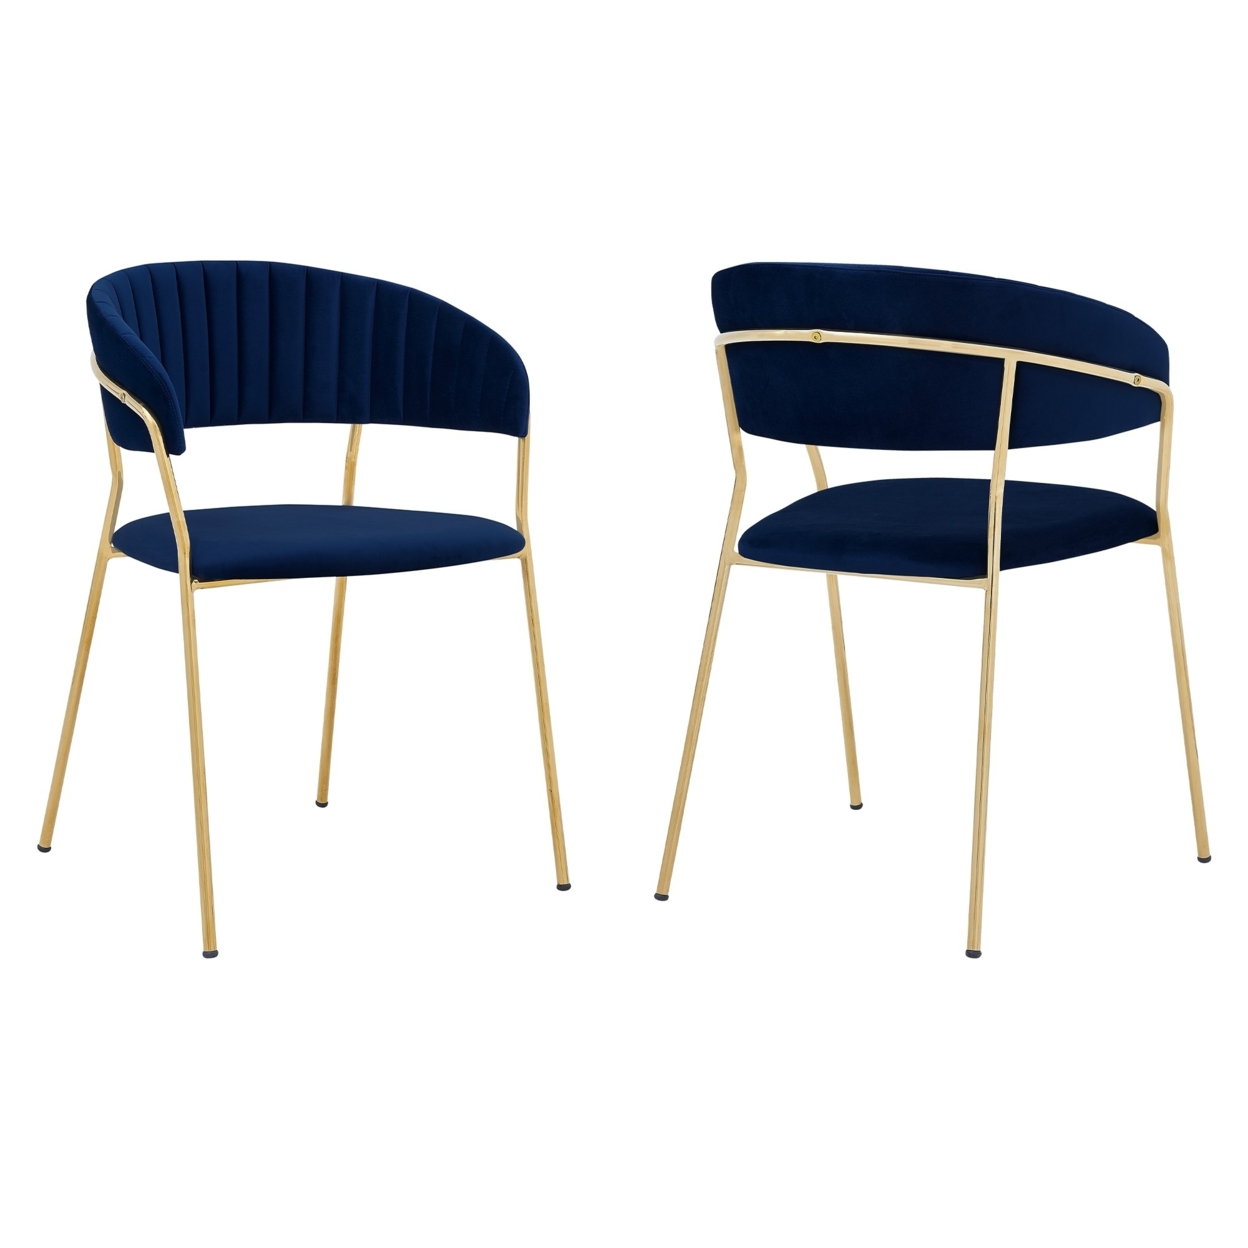 Dining Chair With Open Curved Padded Back, Set Of 2, Blue And Gold- Saltoro Sherpi